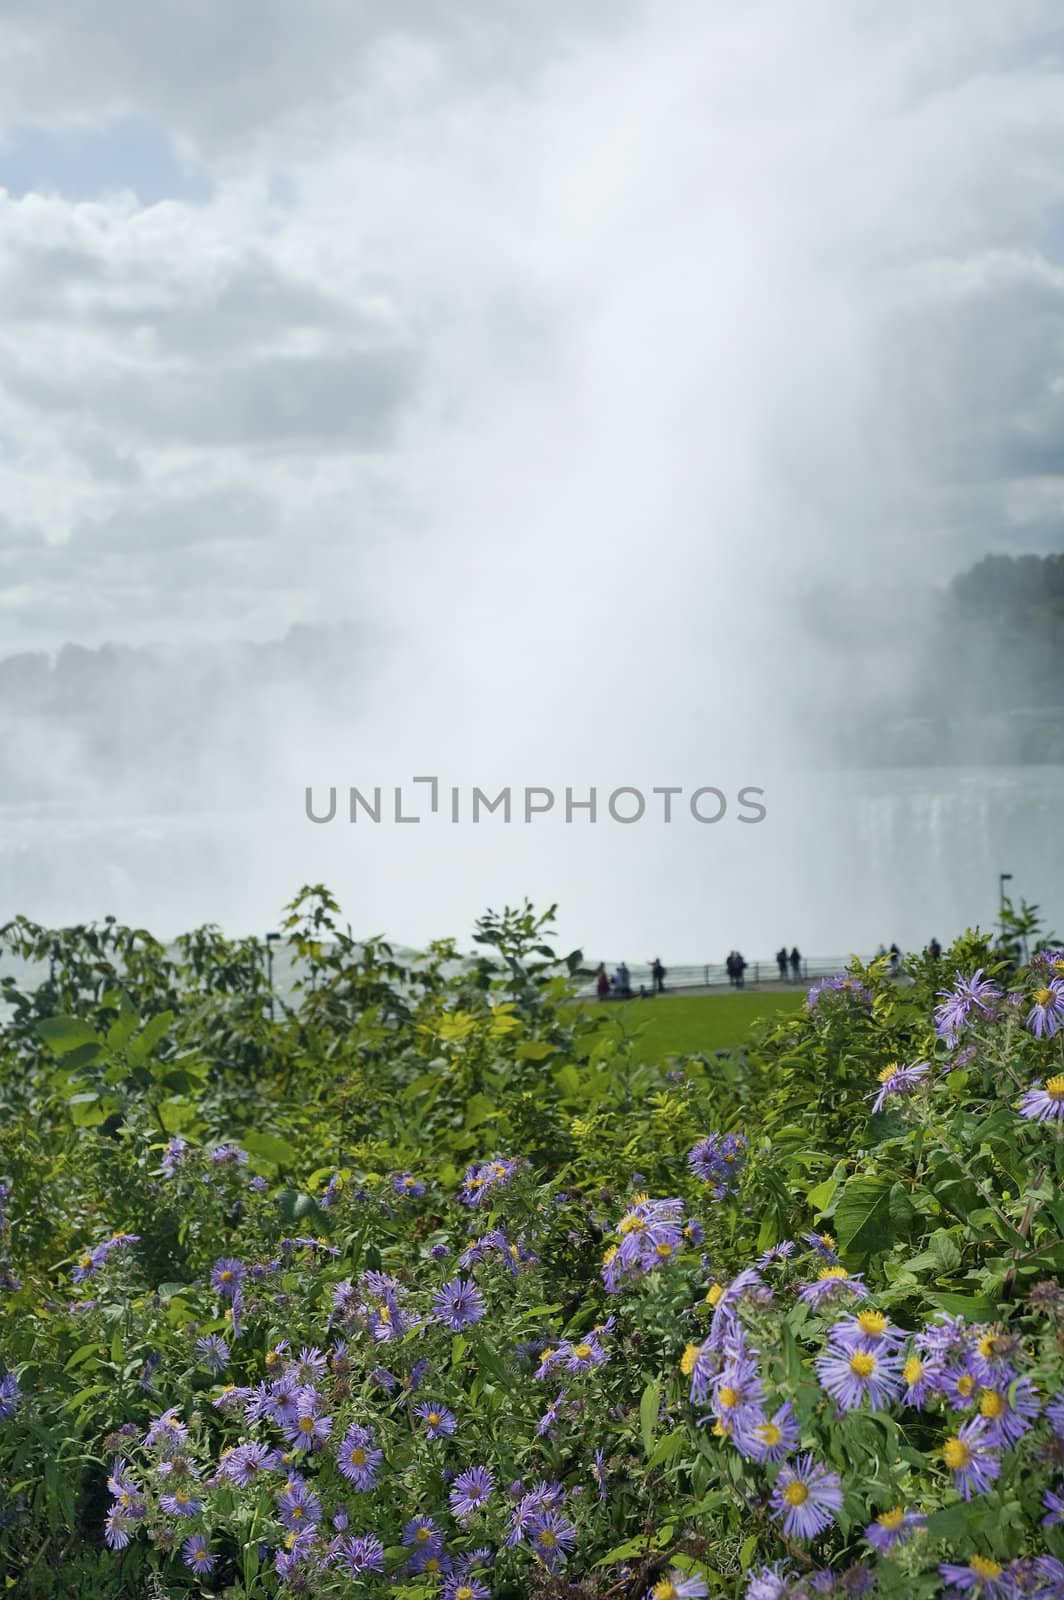 mist rising from horseshoe falls at niagara falls, flowers in foreground